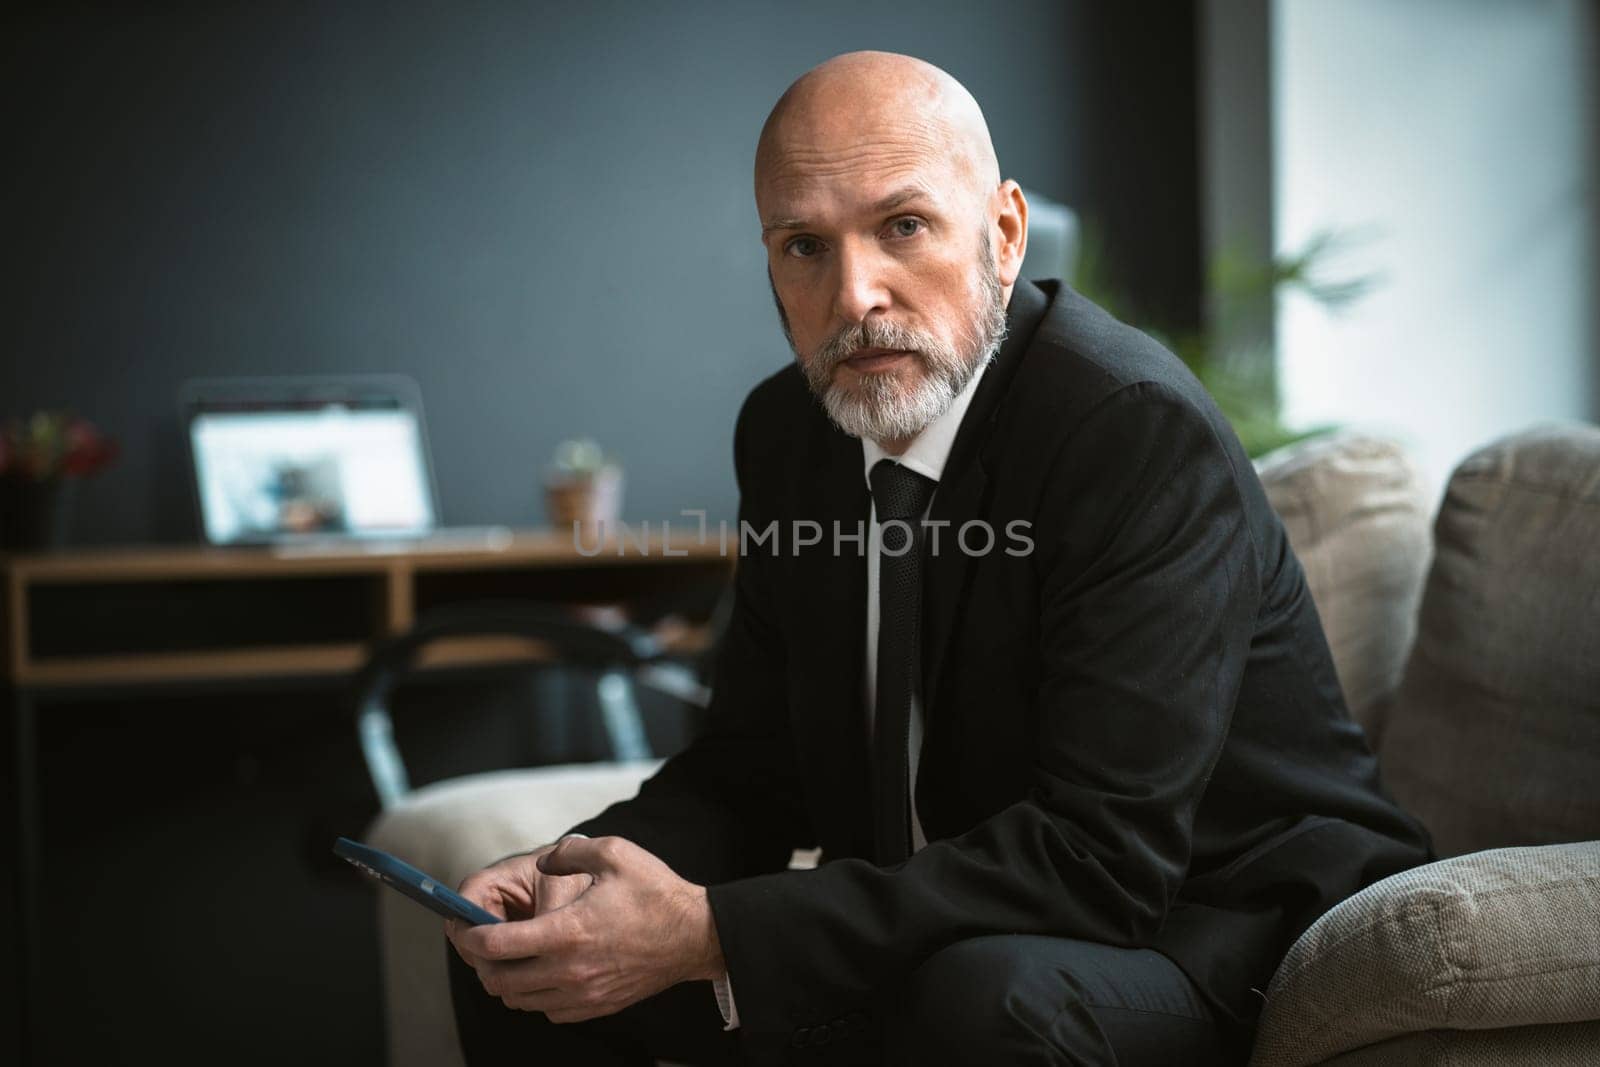 Sad man in a black suit who is looking for job. The mature businessman, with his distinguished silver beard, can be seen browsing the internet in search of work. High quality photo